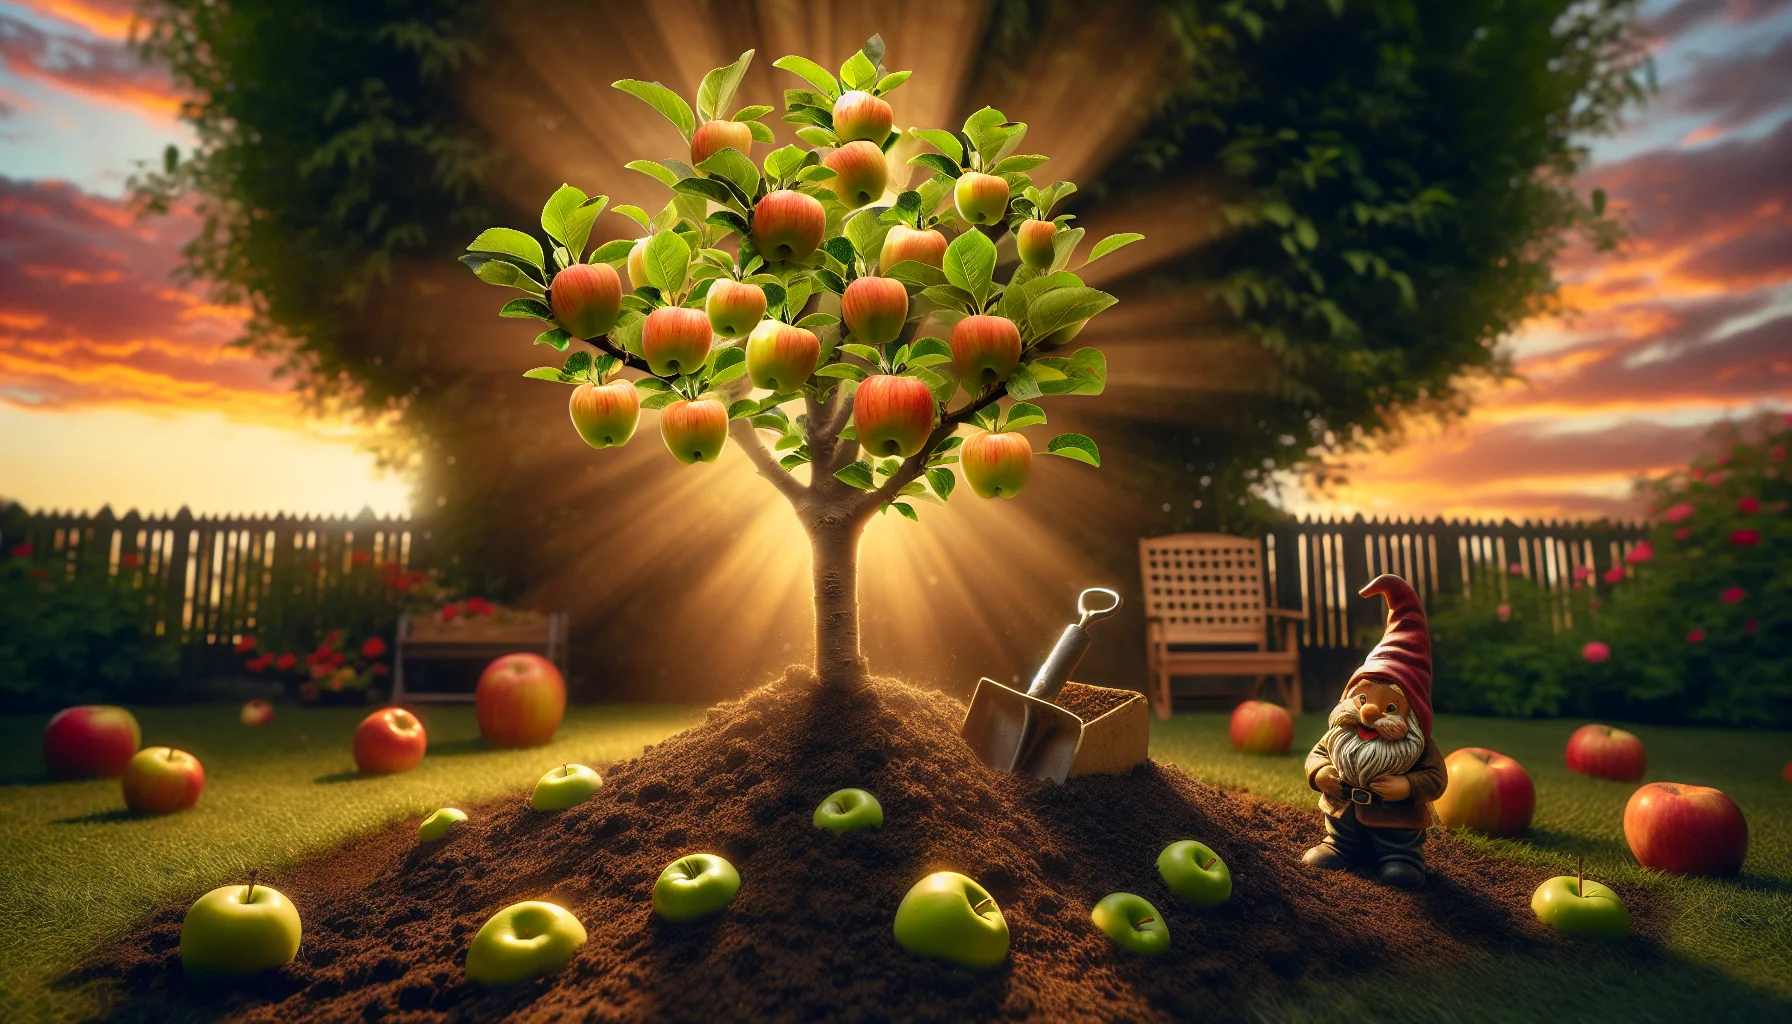 Visualize an amusing and realistic scenario showing the growth rate of apple trees to foster the love of gardening. Picture a time-lapse scenario in which a tiny apple sapling, with bright green leaves and robust trunk, sprouts from the ground. Gradually, it matures into a full-grown apple tree laden with vibrant, juicy apples. The transformation happens so swiftly that jolly garden gnome figures in the background appear bewildered. The setting sun bathes everything in a golden glow, an inviting sight for any potential gardener.